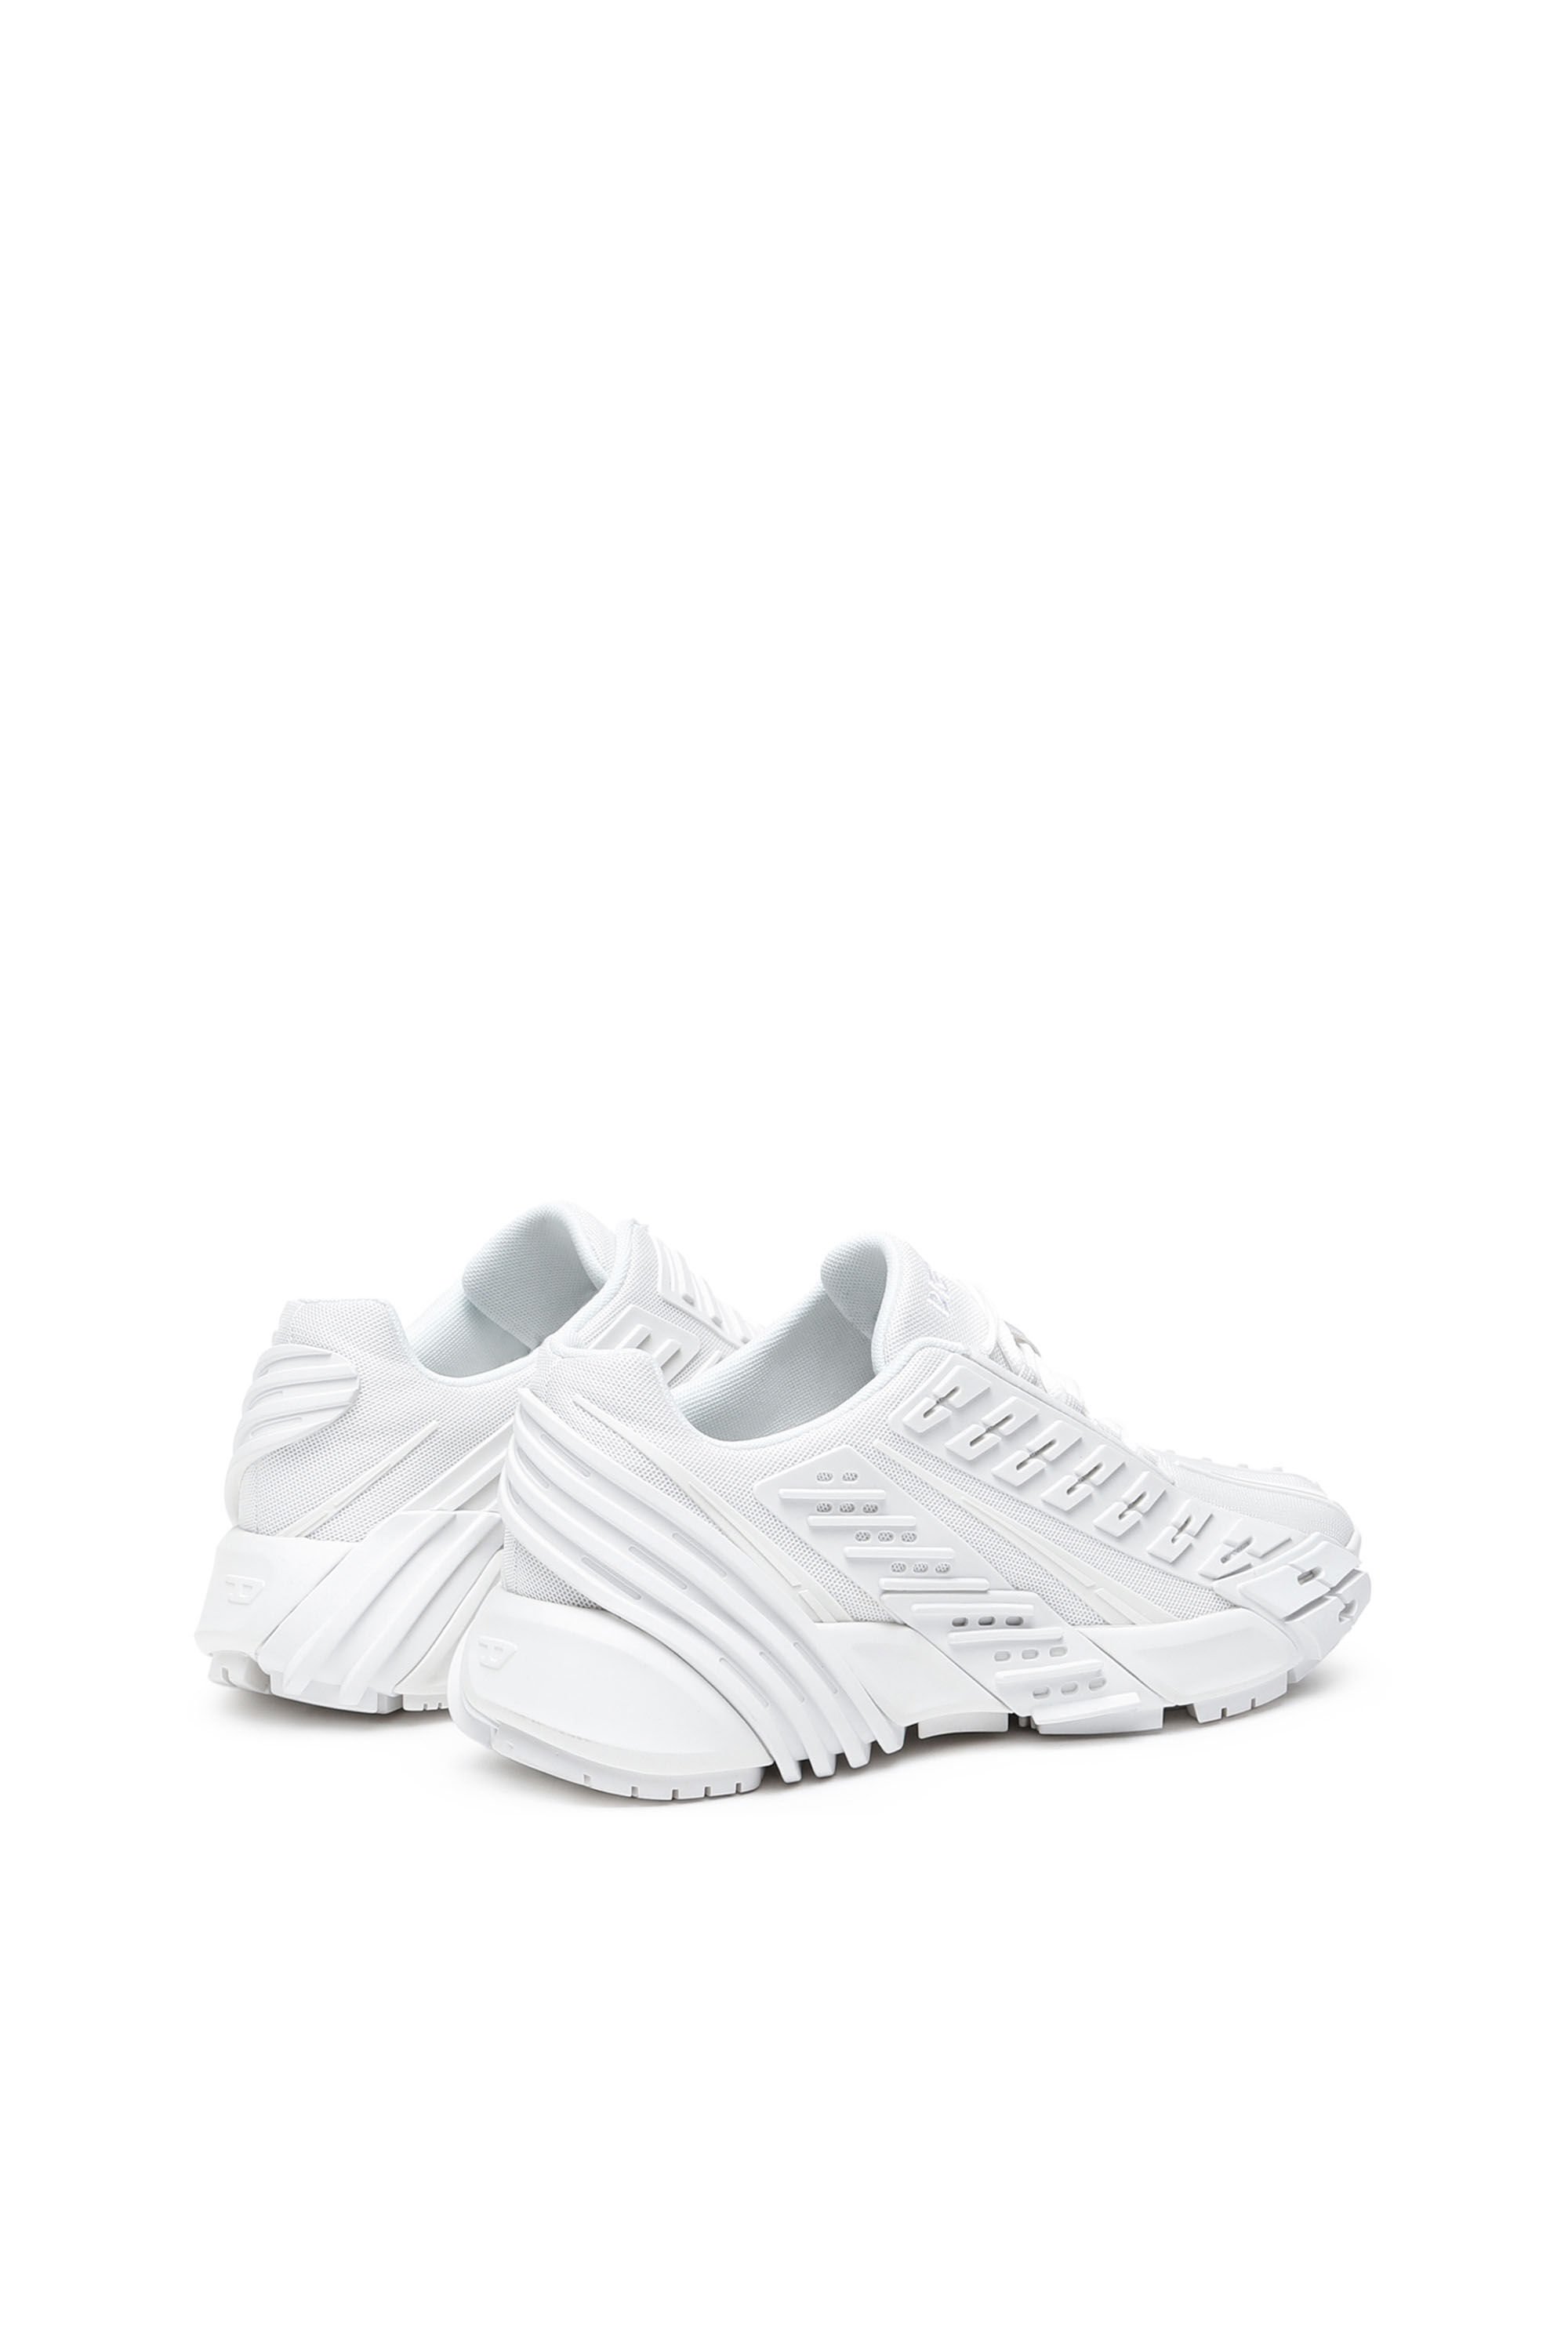 Diesel - S-PROTOTYPE LOW, Man S-Prototype Low - Sneakers in mesh and rubber in White - Image 3